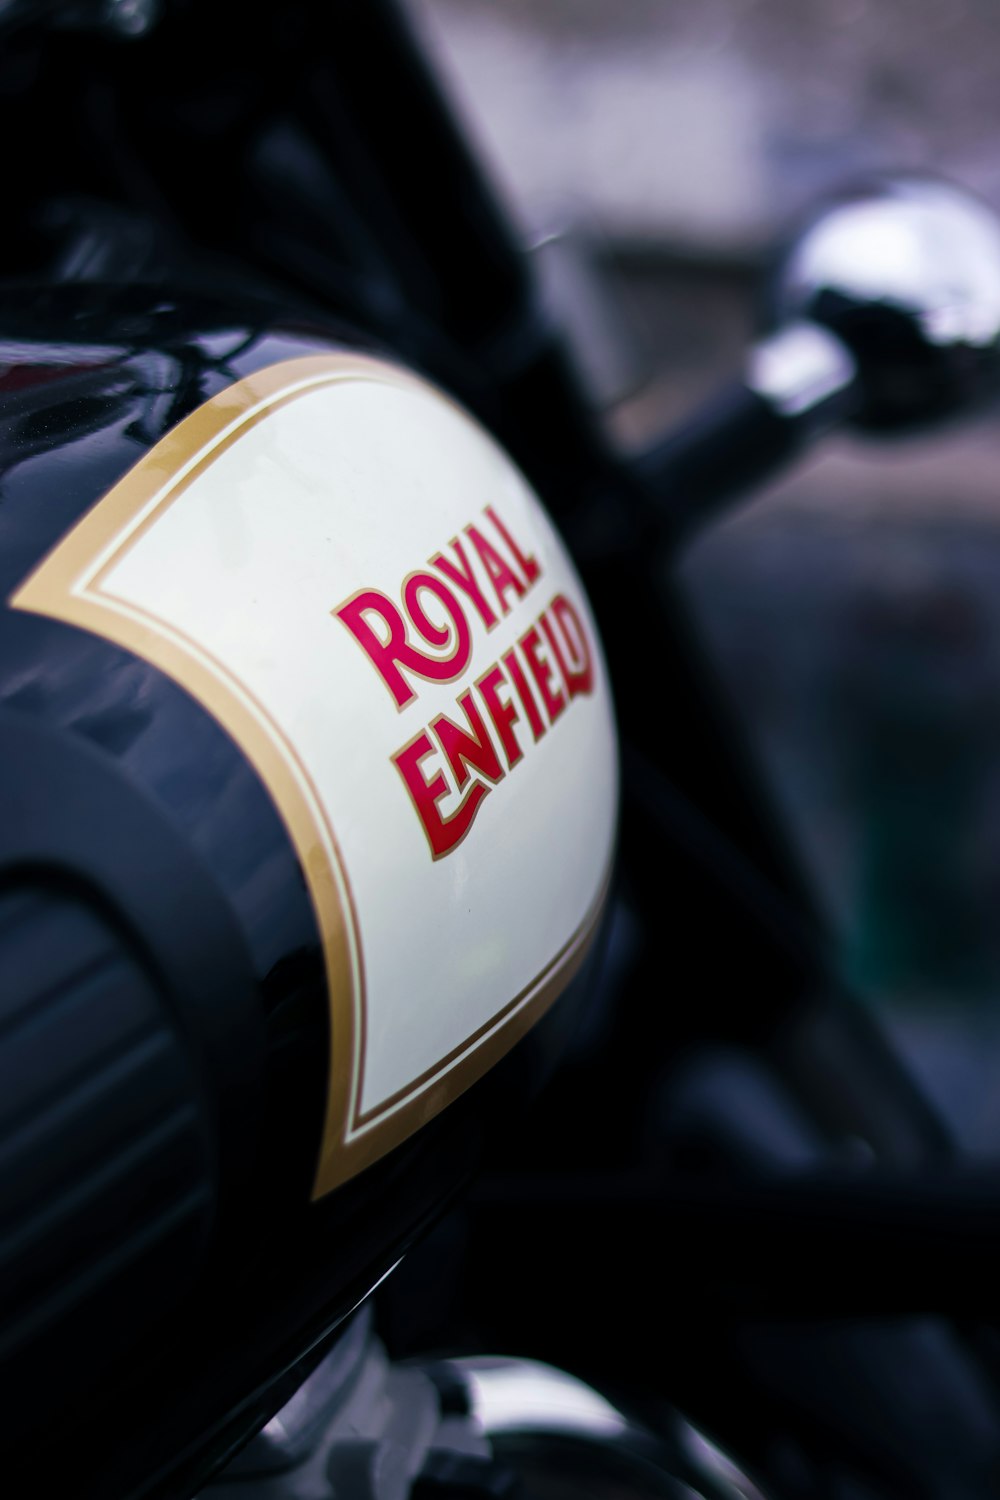 a close up of the royal enfield logo on a motorcycle